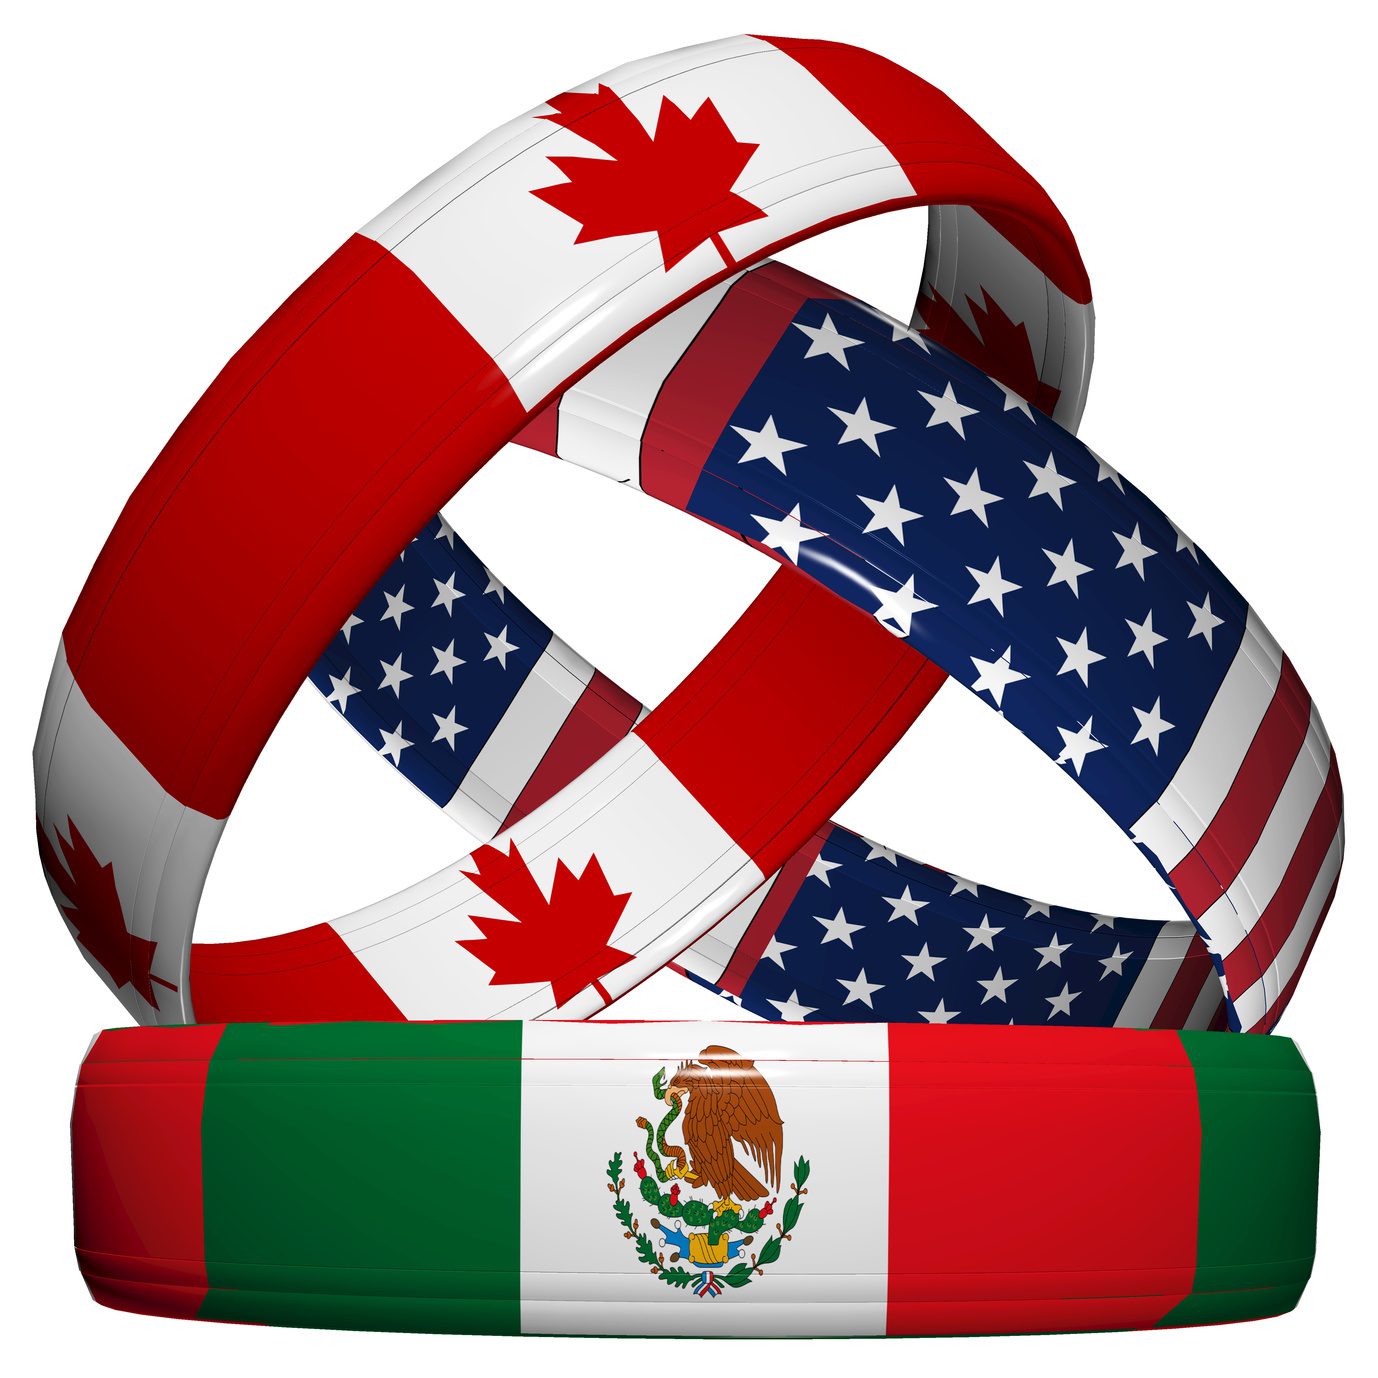 NAFTA 2.0 – Mexico Left with Little Choice but to Renegotiate, and Fast